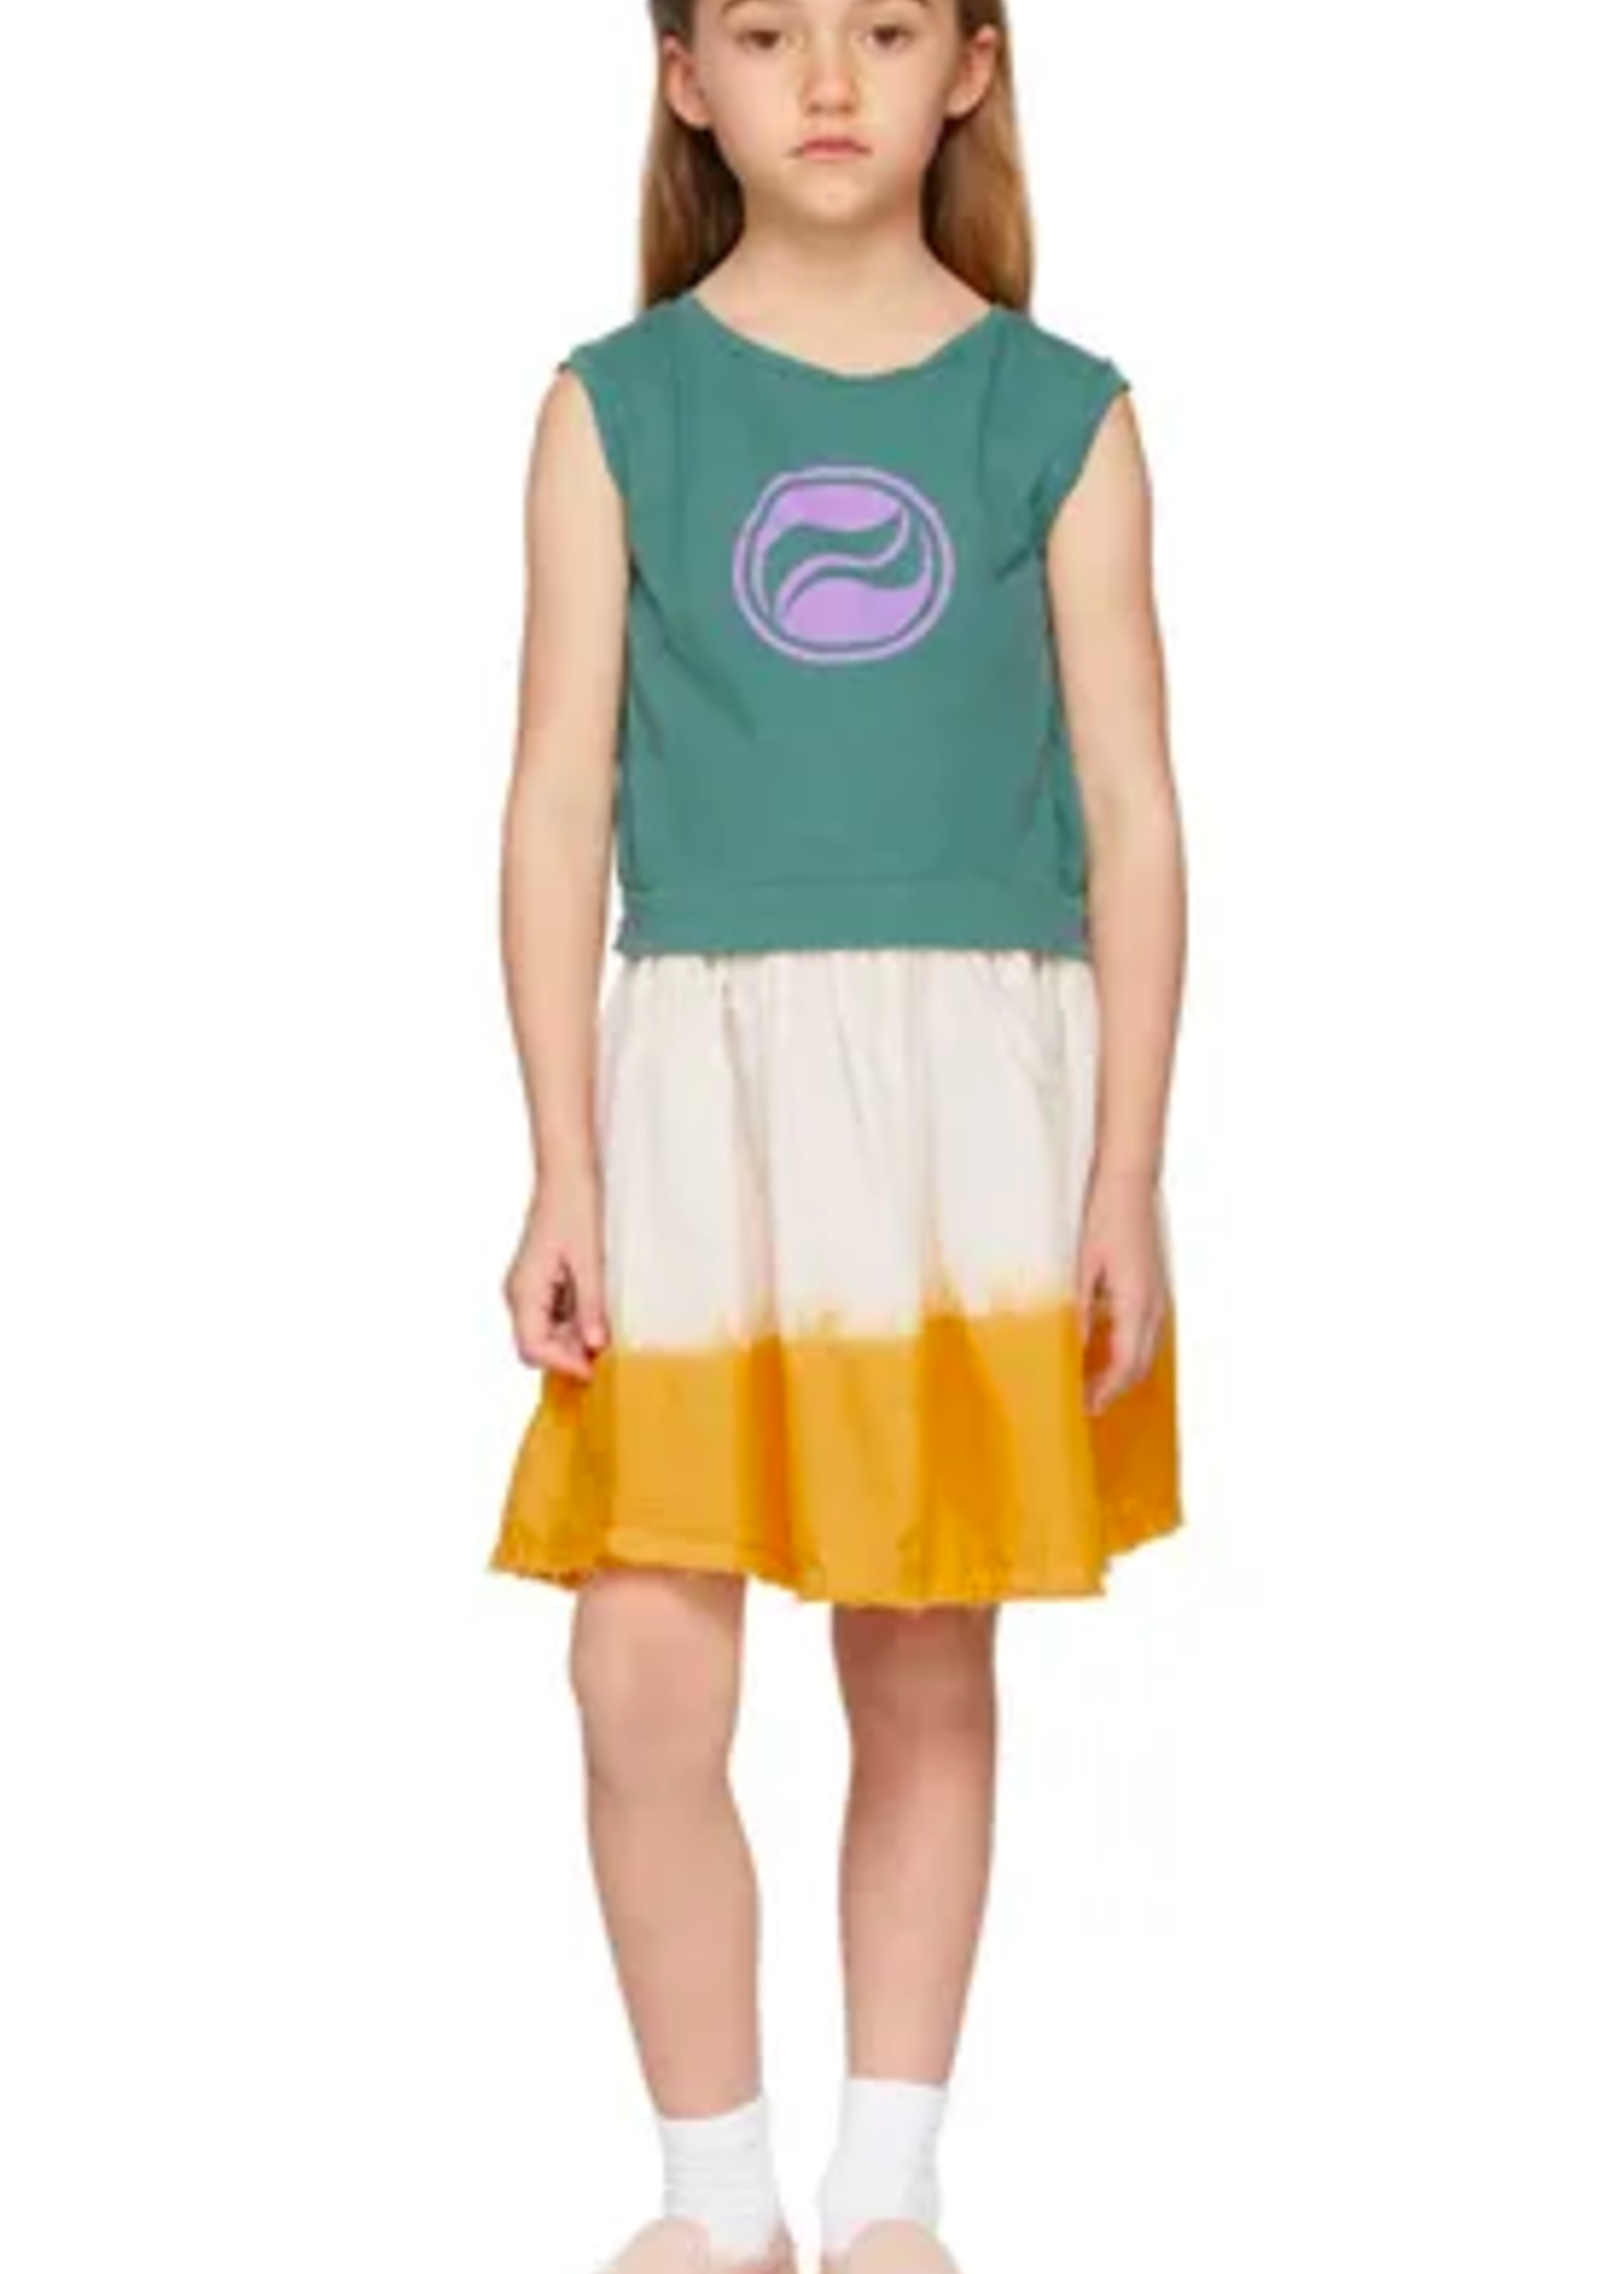 Long Live The Queen Sleeveless shirt Yellow print 10-12y